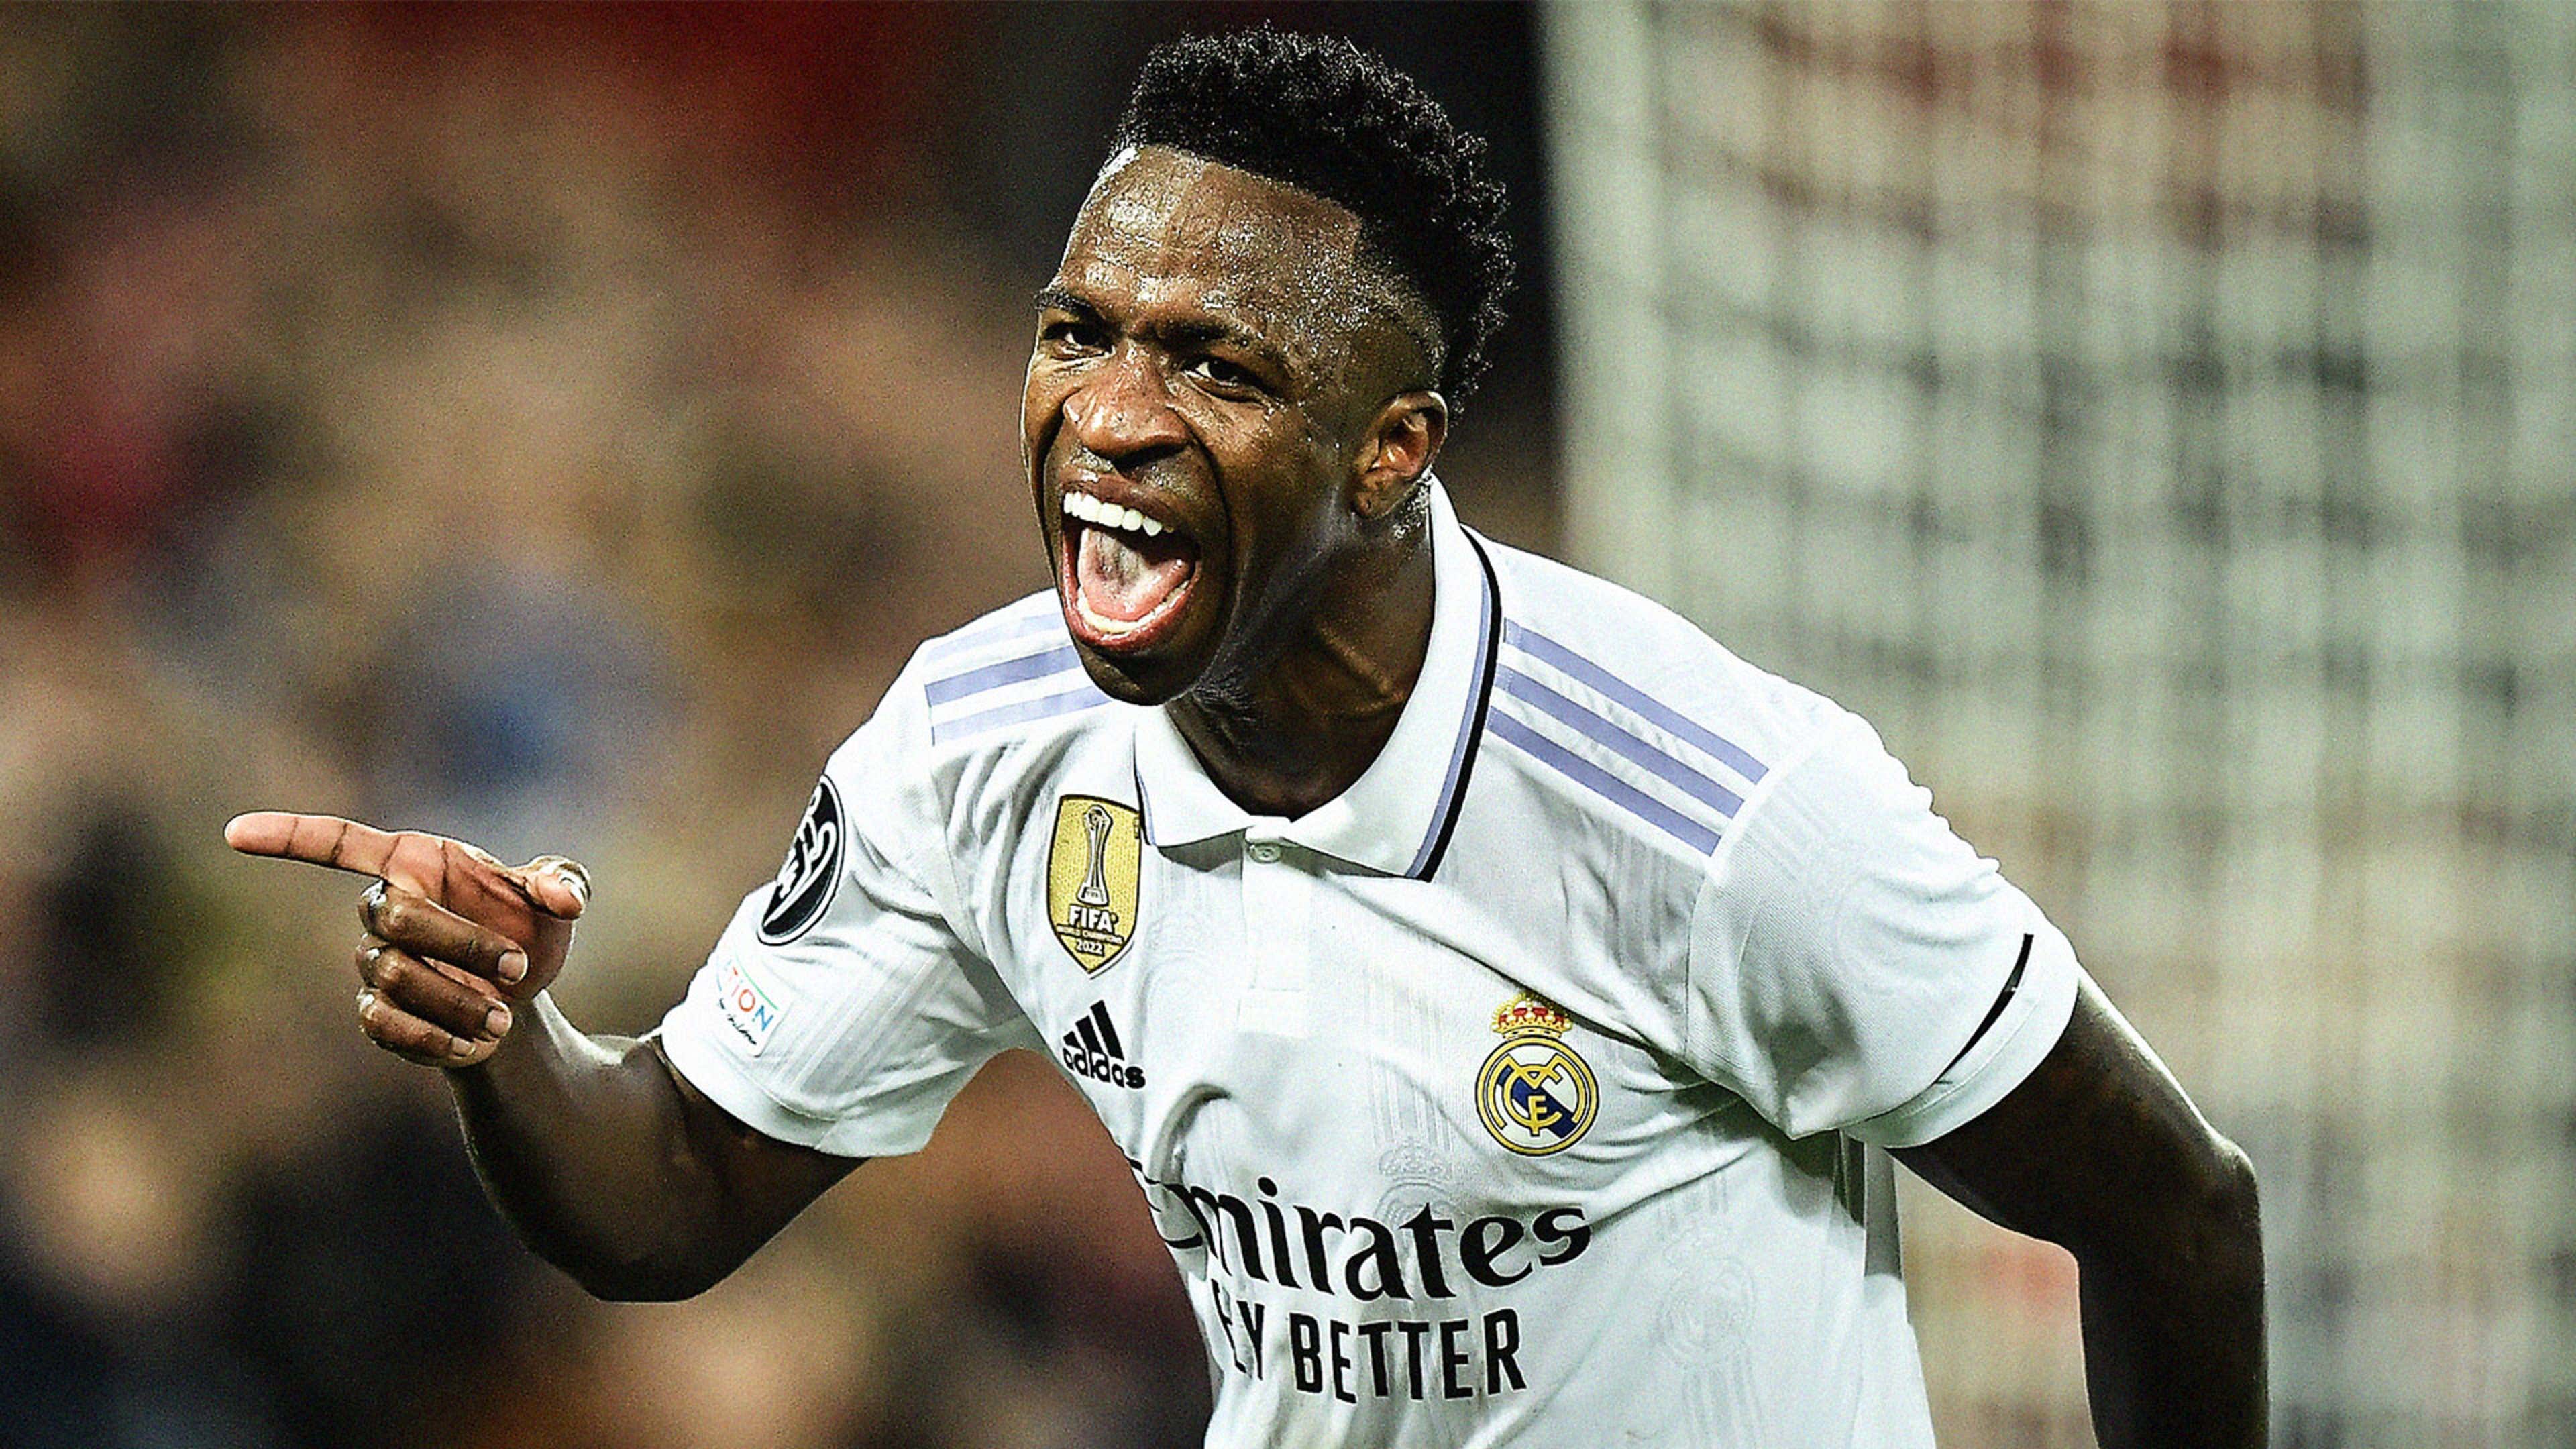 Champions League: Real Madrid's 'one man wrecking crew' Vinicius